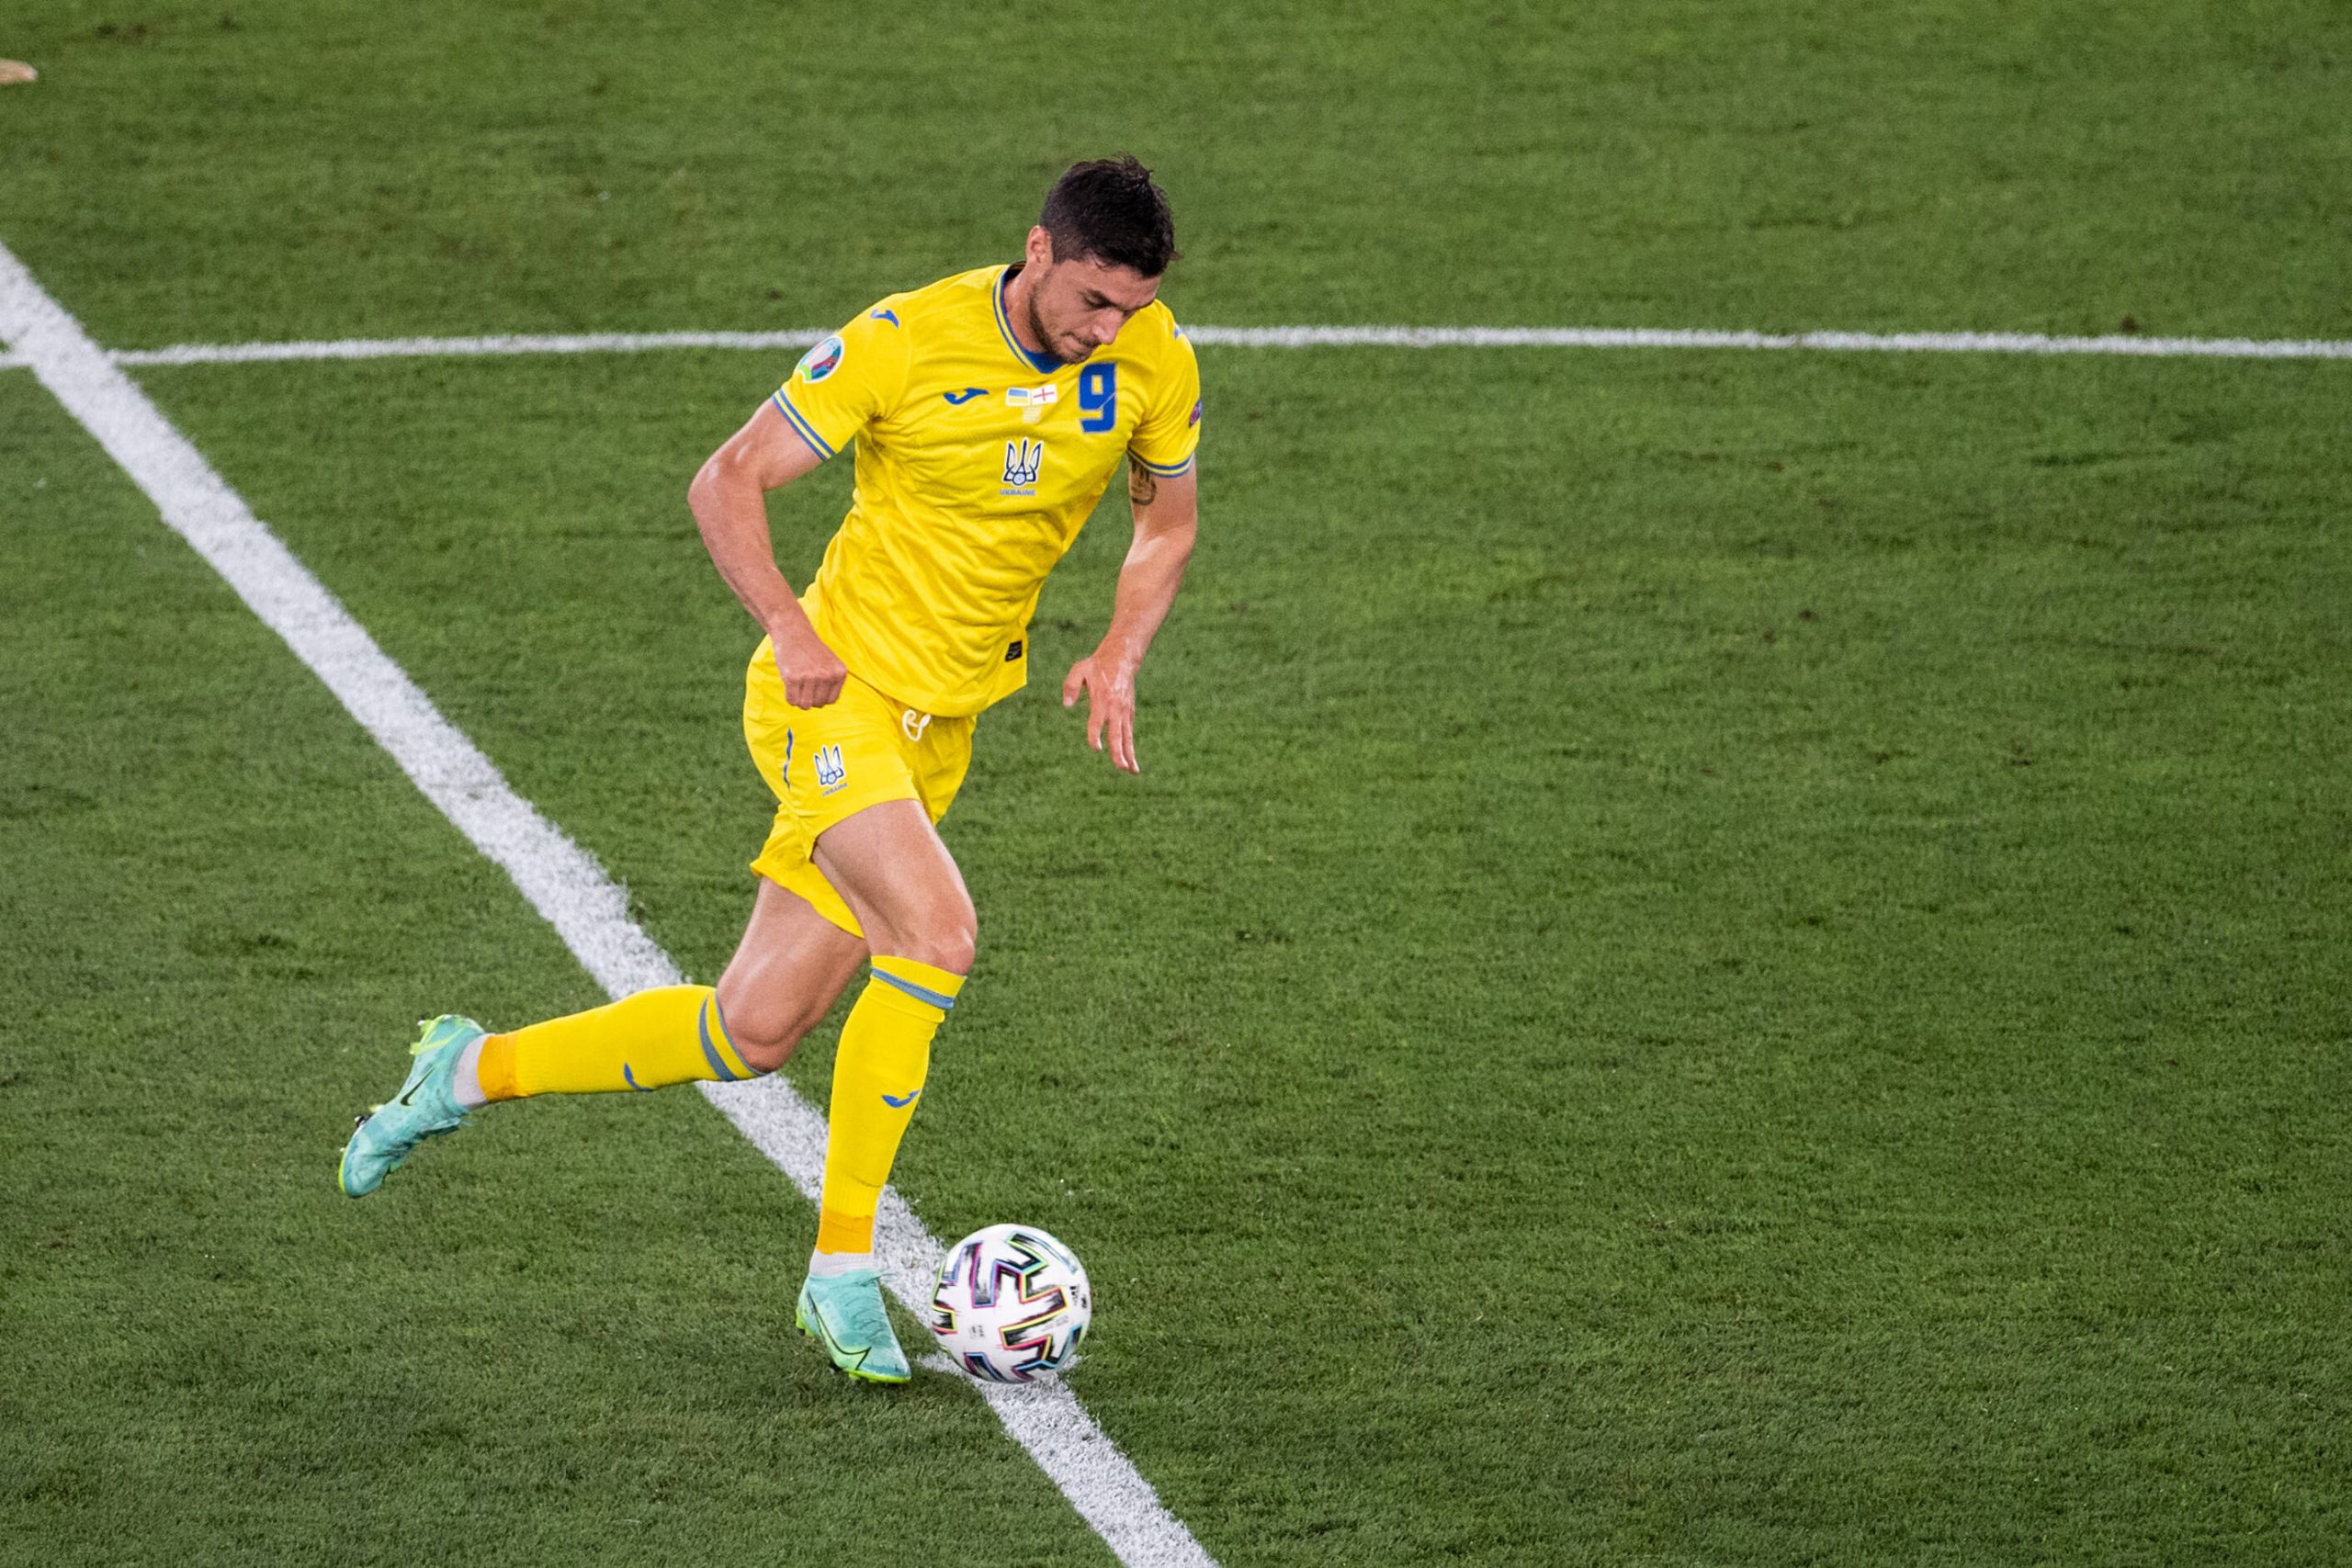 Whose Stock Rose for Ukraine at EURO 2020?